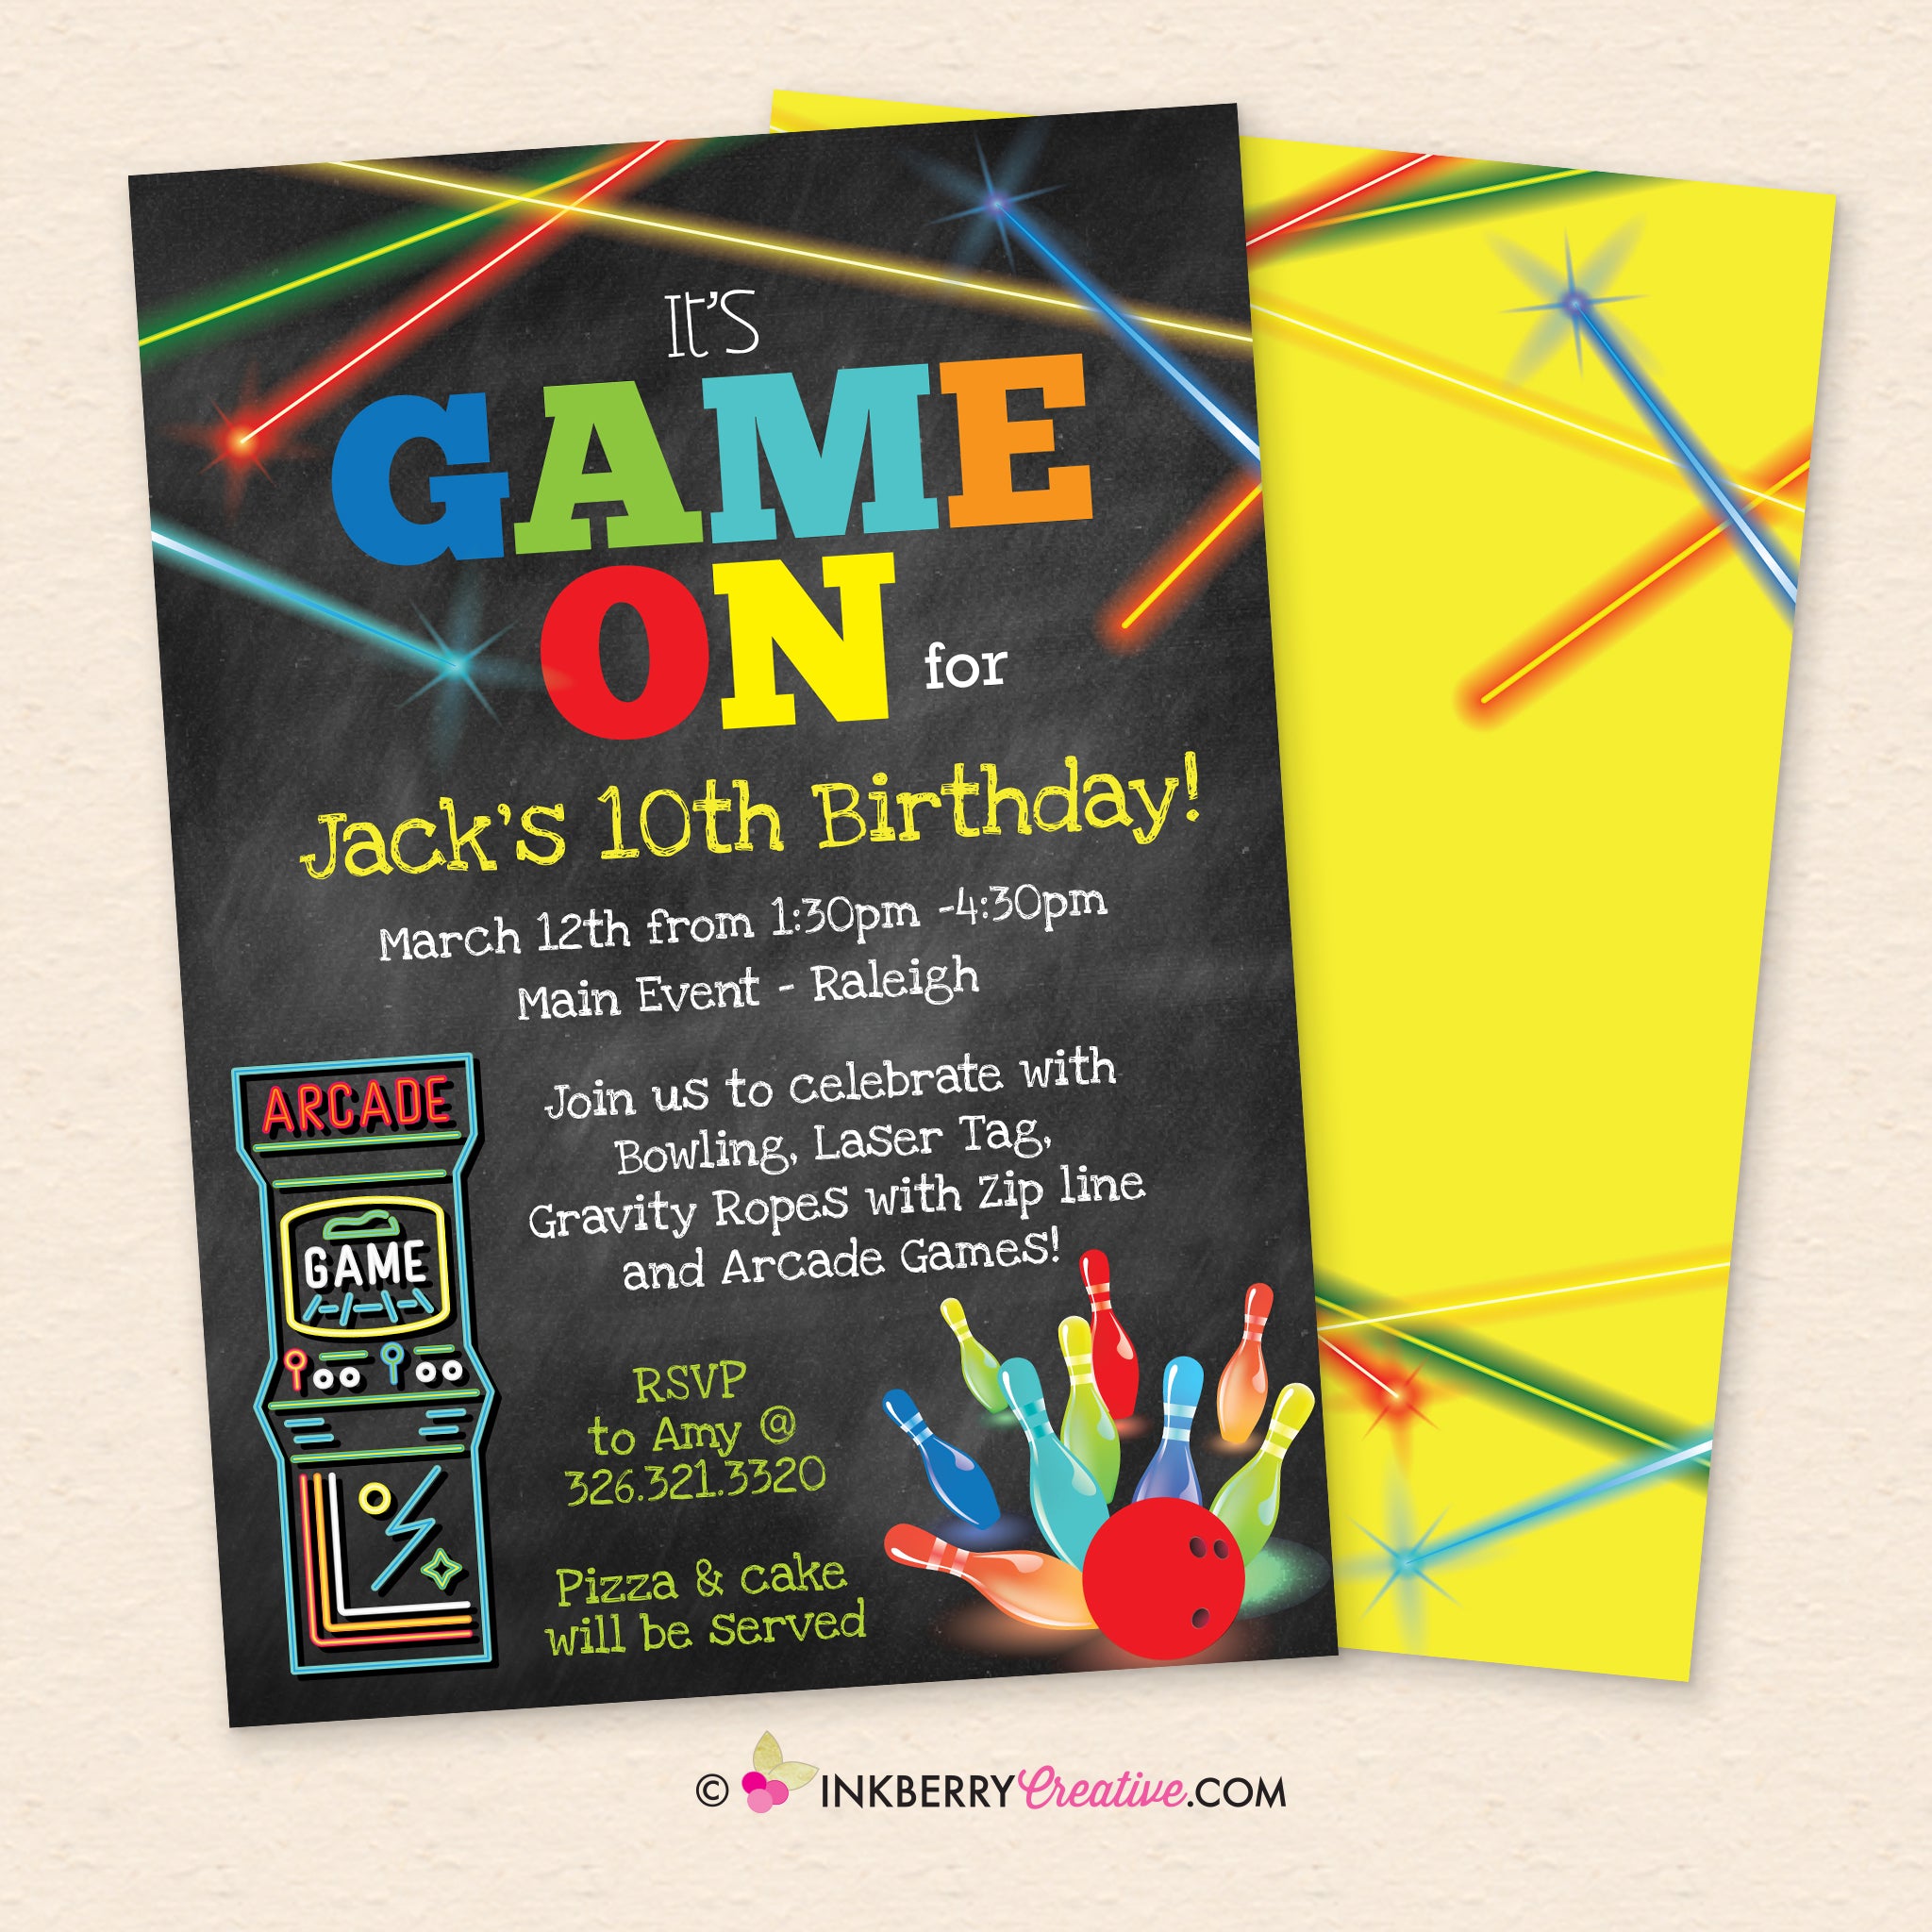 Game On - Arcade Games, Laser Tag, Bowling Birthday Party Invitation – Inkberry Creative, Inc.